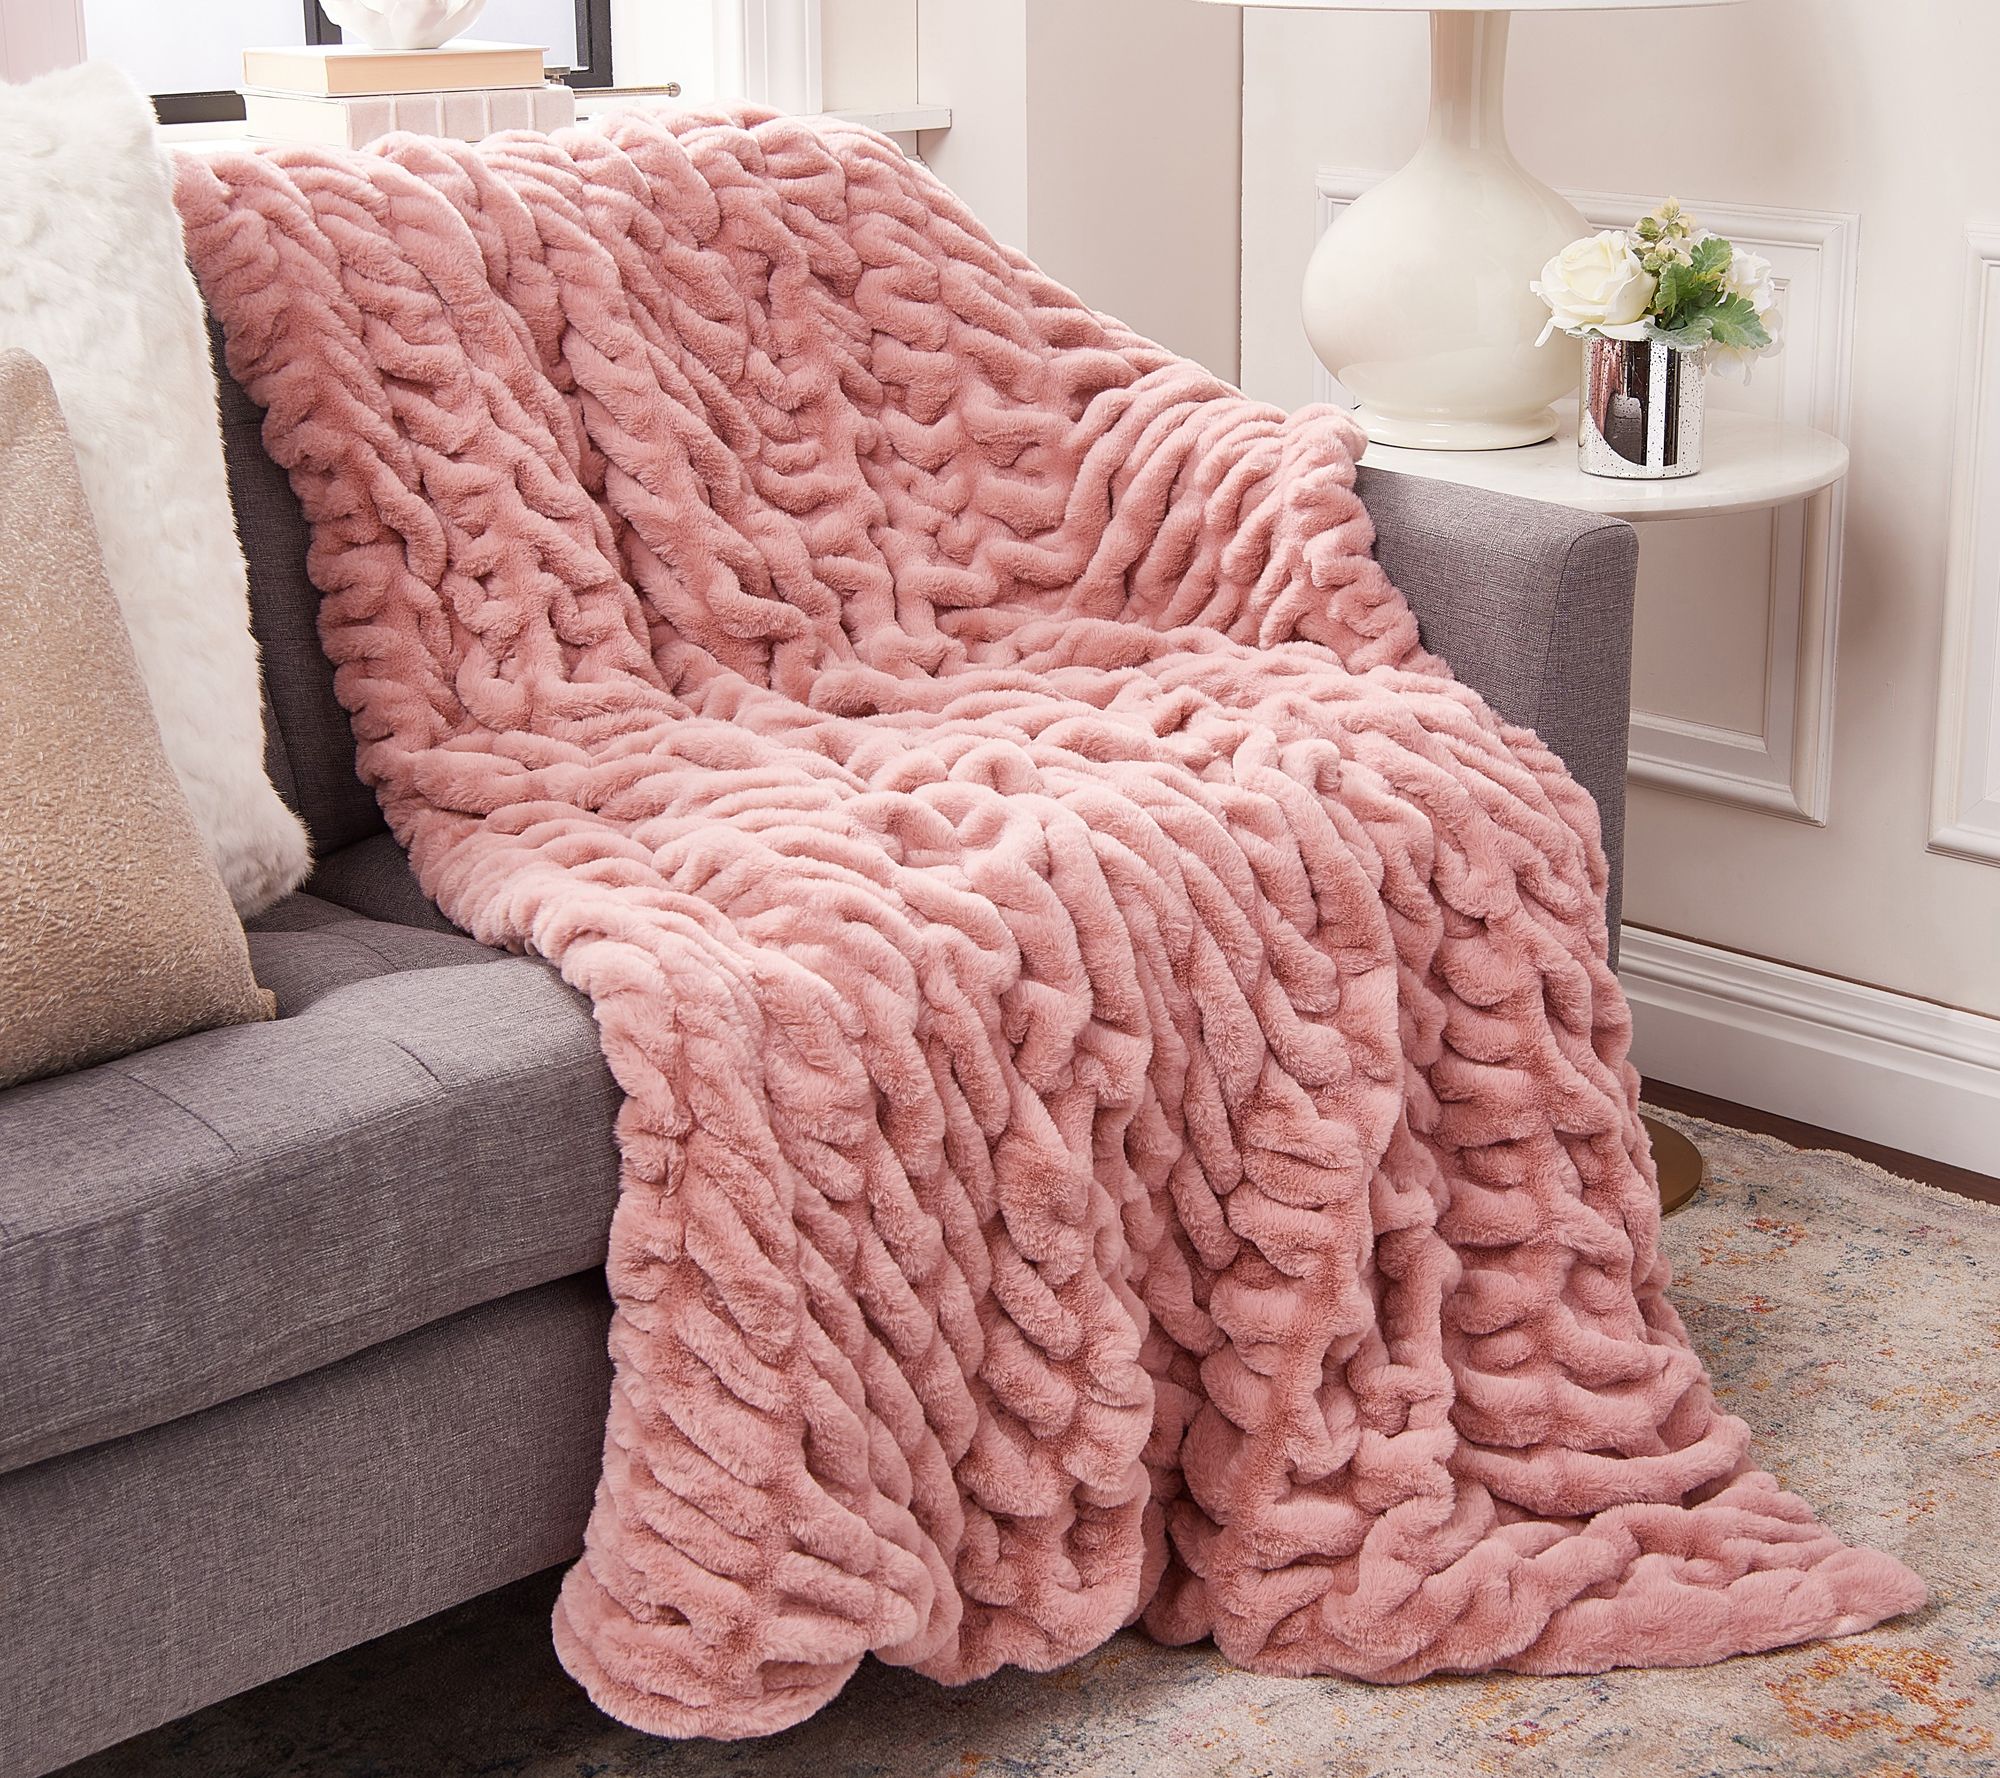 Chanel CC Beige Throw Blanket – The Luxe Base